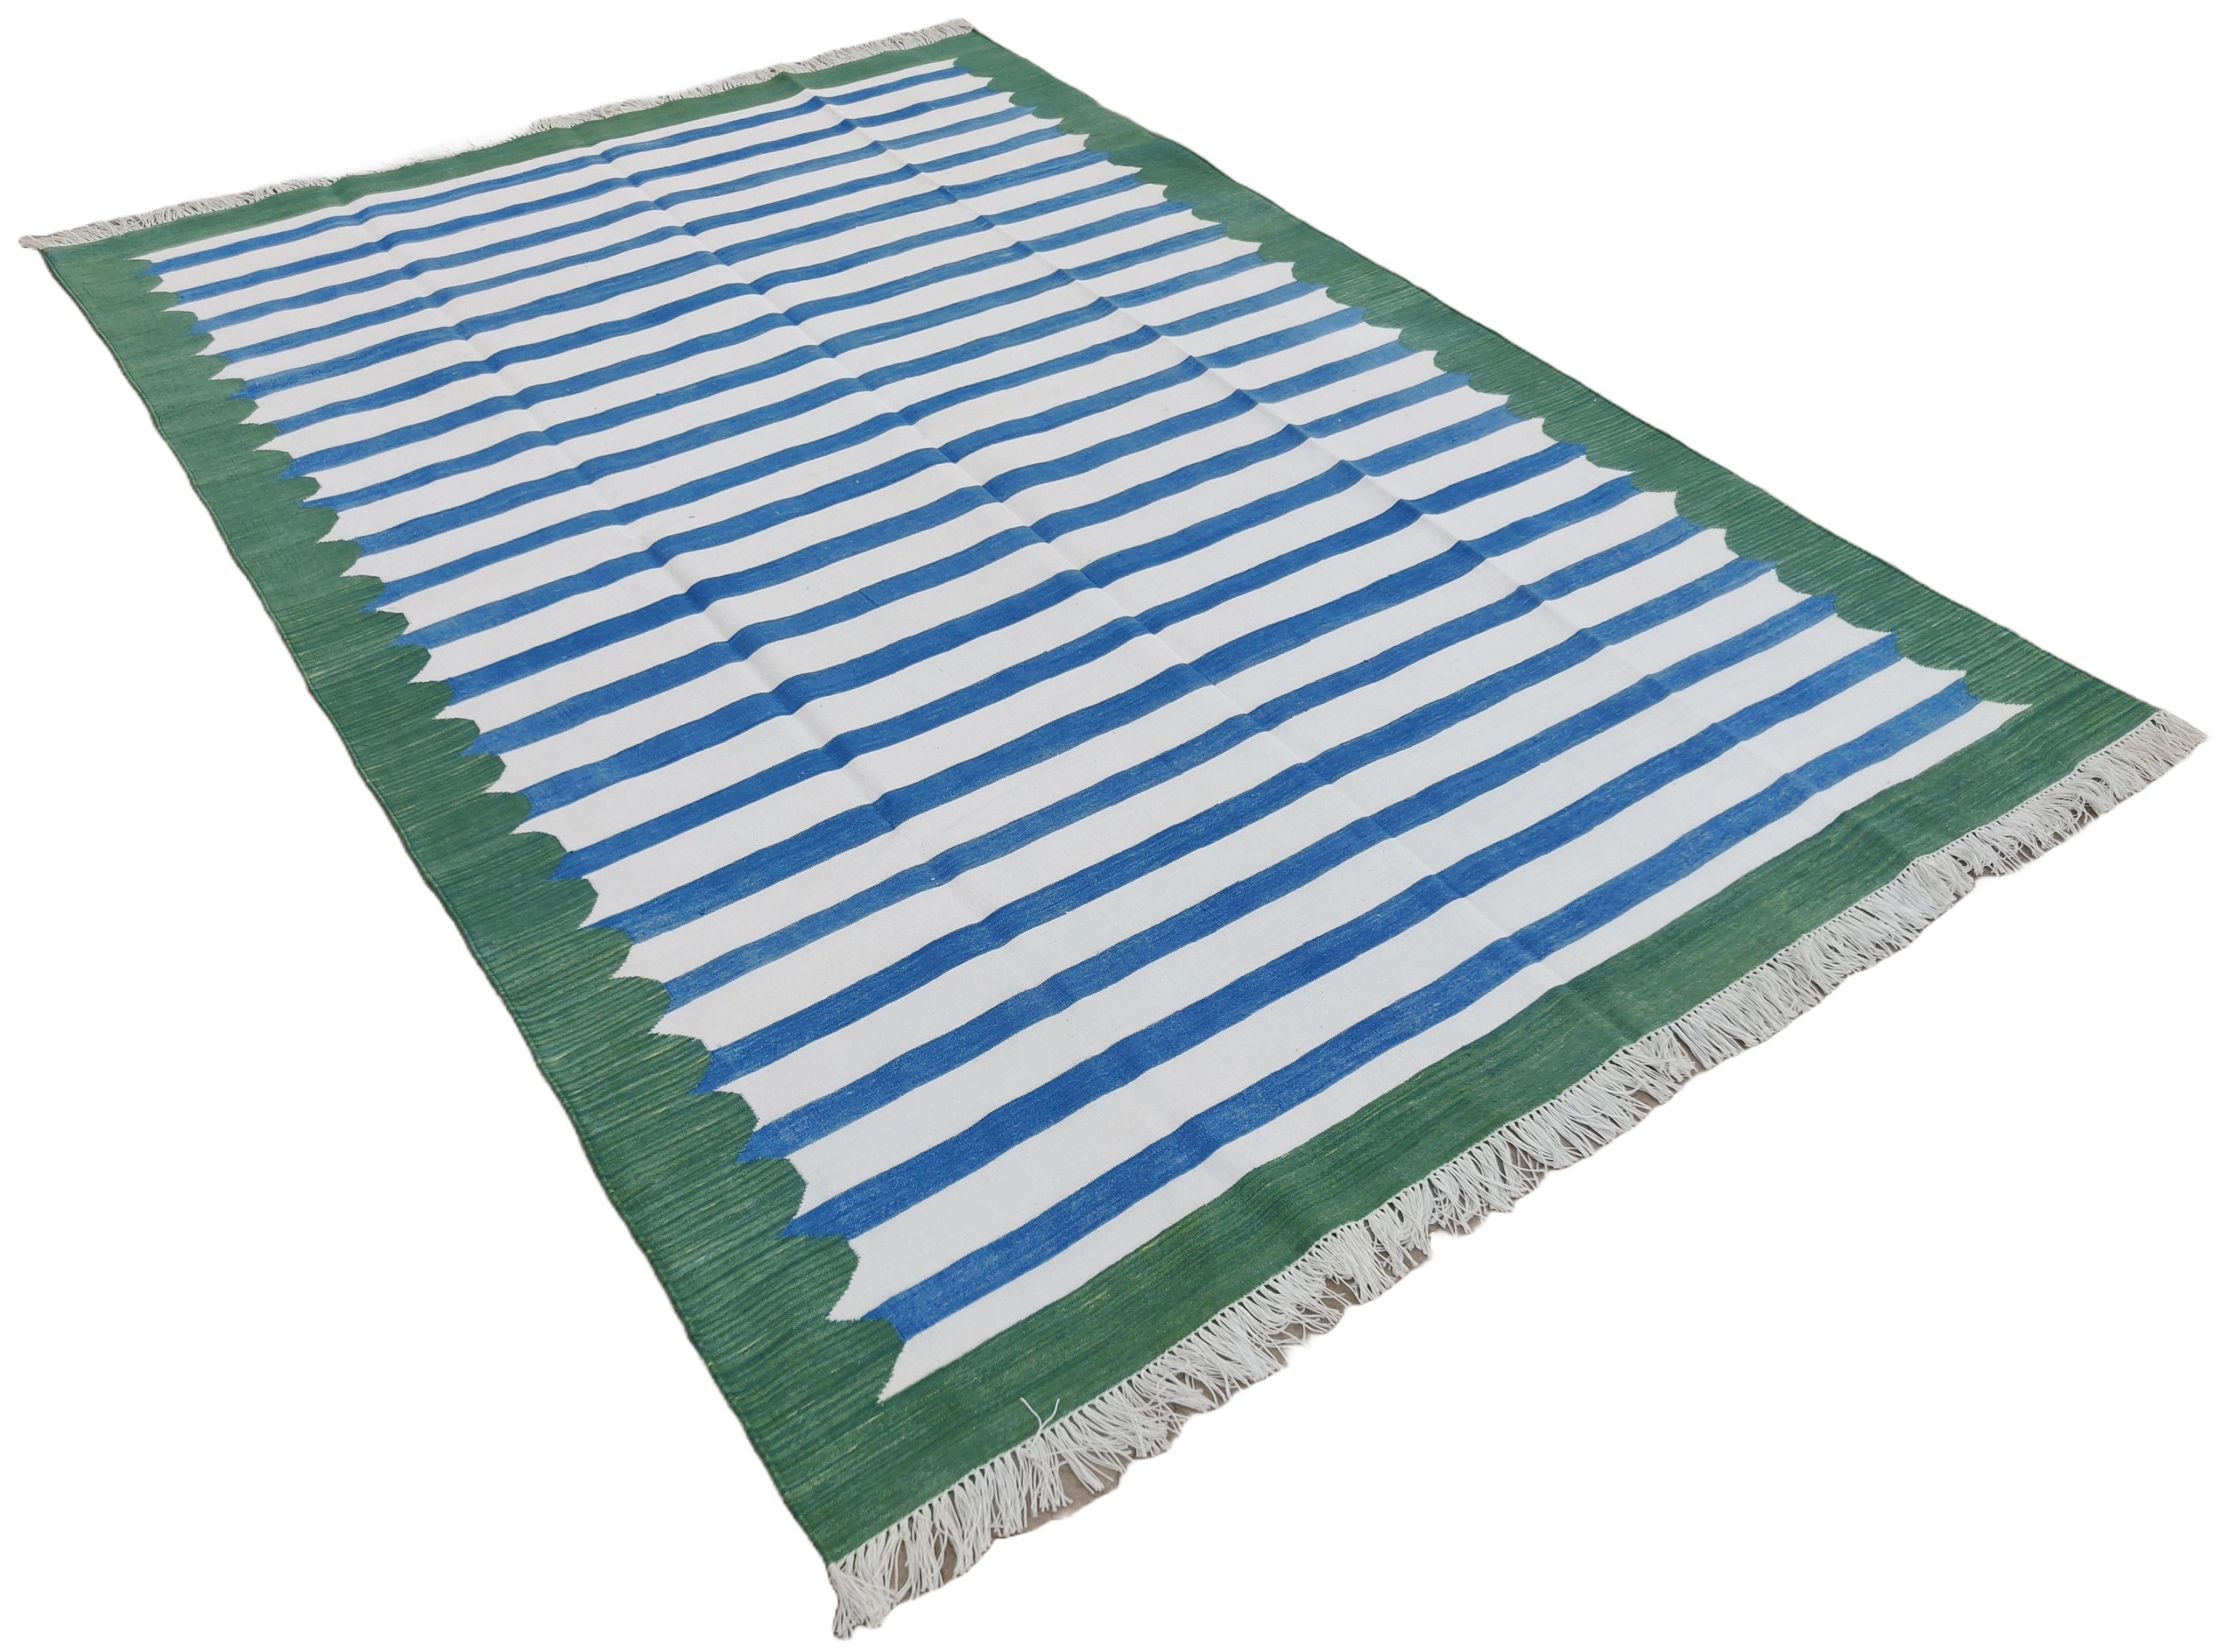 Cotton Vegetable Dyed Blue, White And Forest Green Scalloped Striped Indian Dhurrie Rug-6'x9' 
These special flat-weave dhurries are hand-woven with 15 ply 100% cotton yarn. Due to the special manufacturing techniques used to create our rugs, the